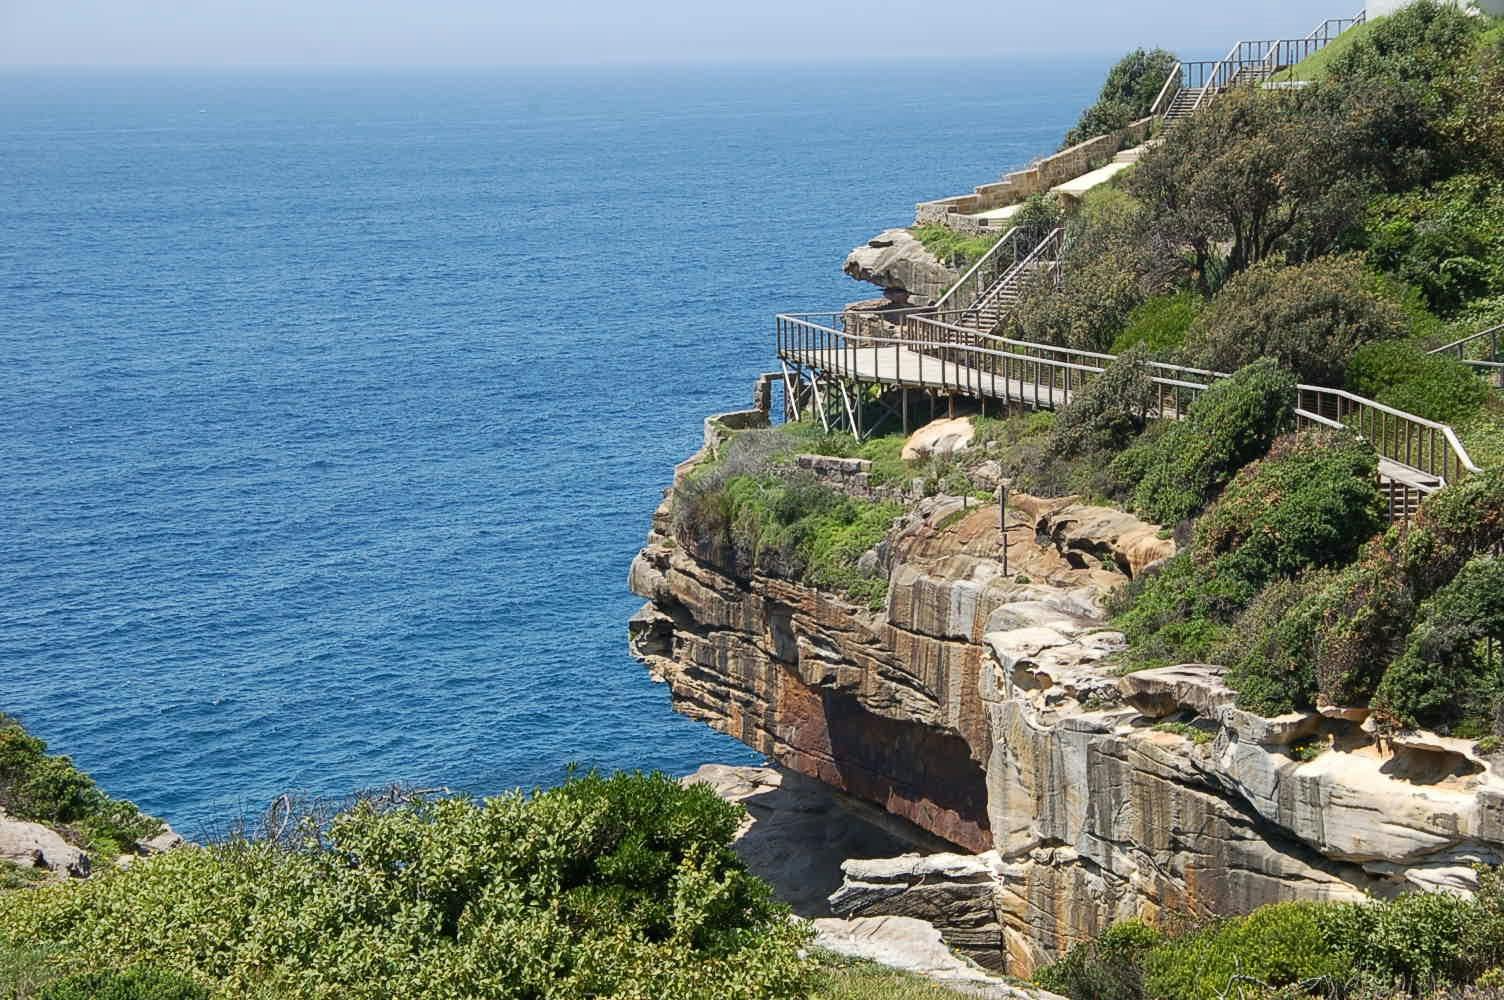 Example of a cliff top walkway 